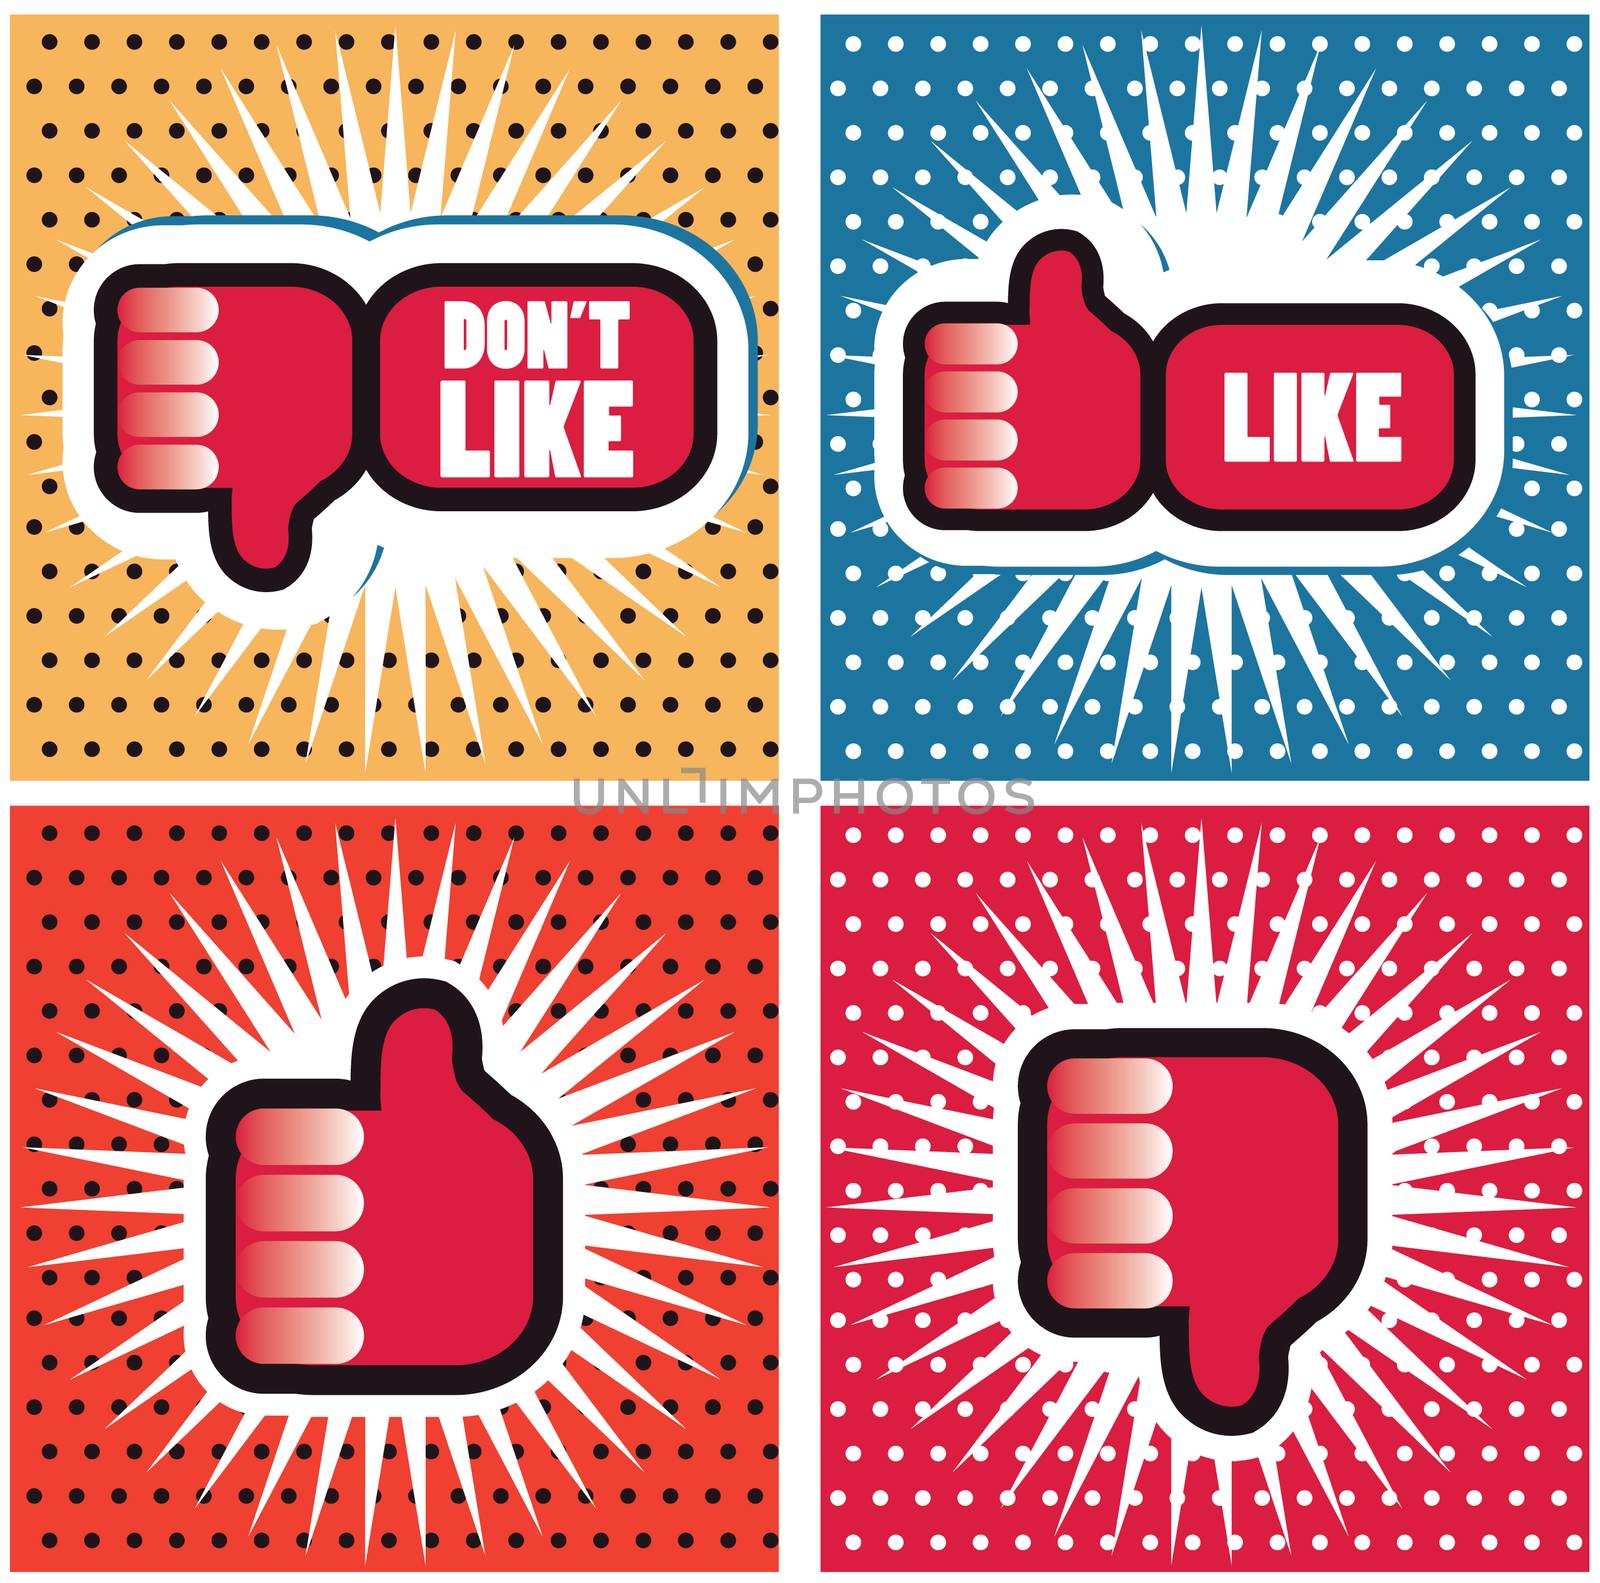 Pop art Comic Book Style Banners with Thumbs up button - like bu by tamaravector